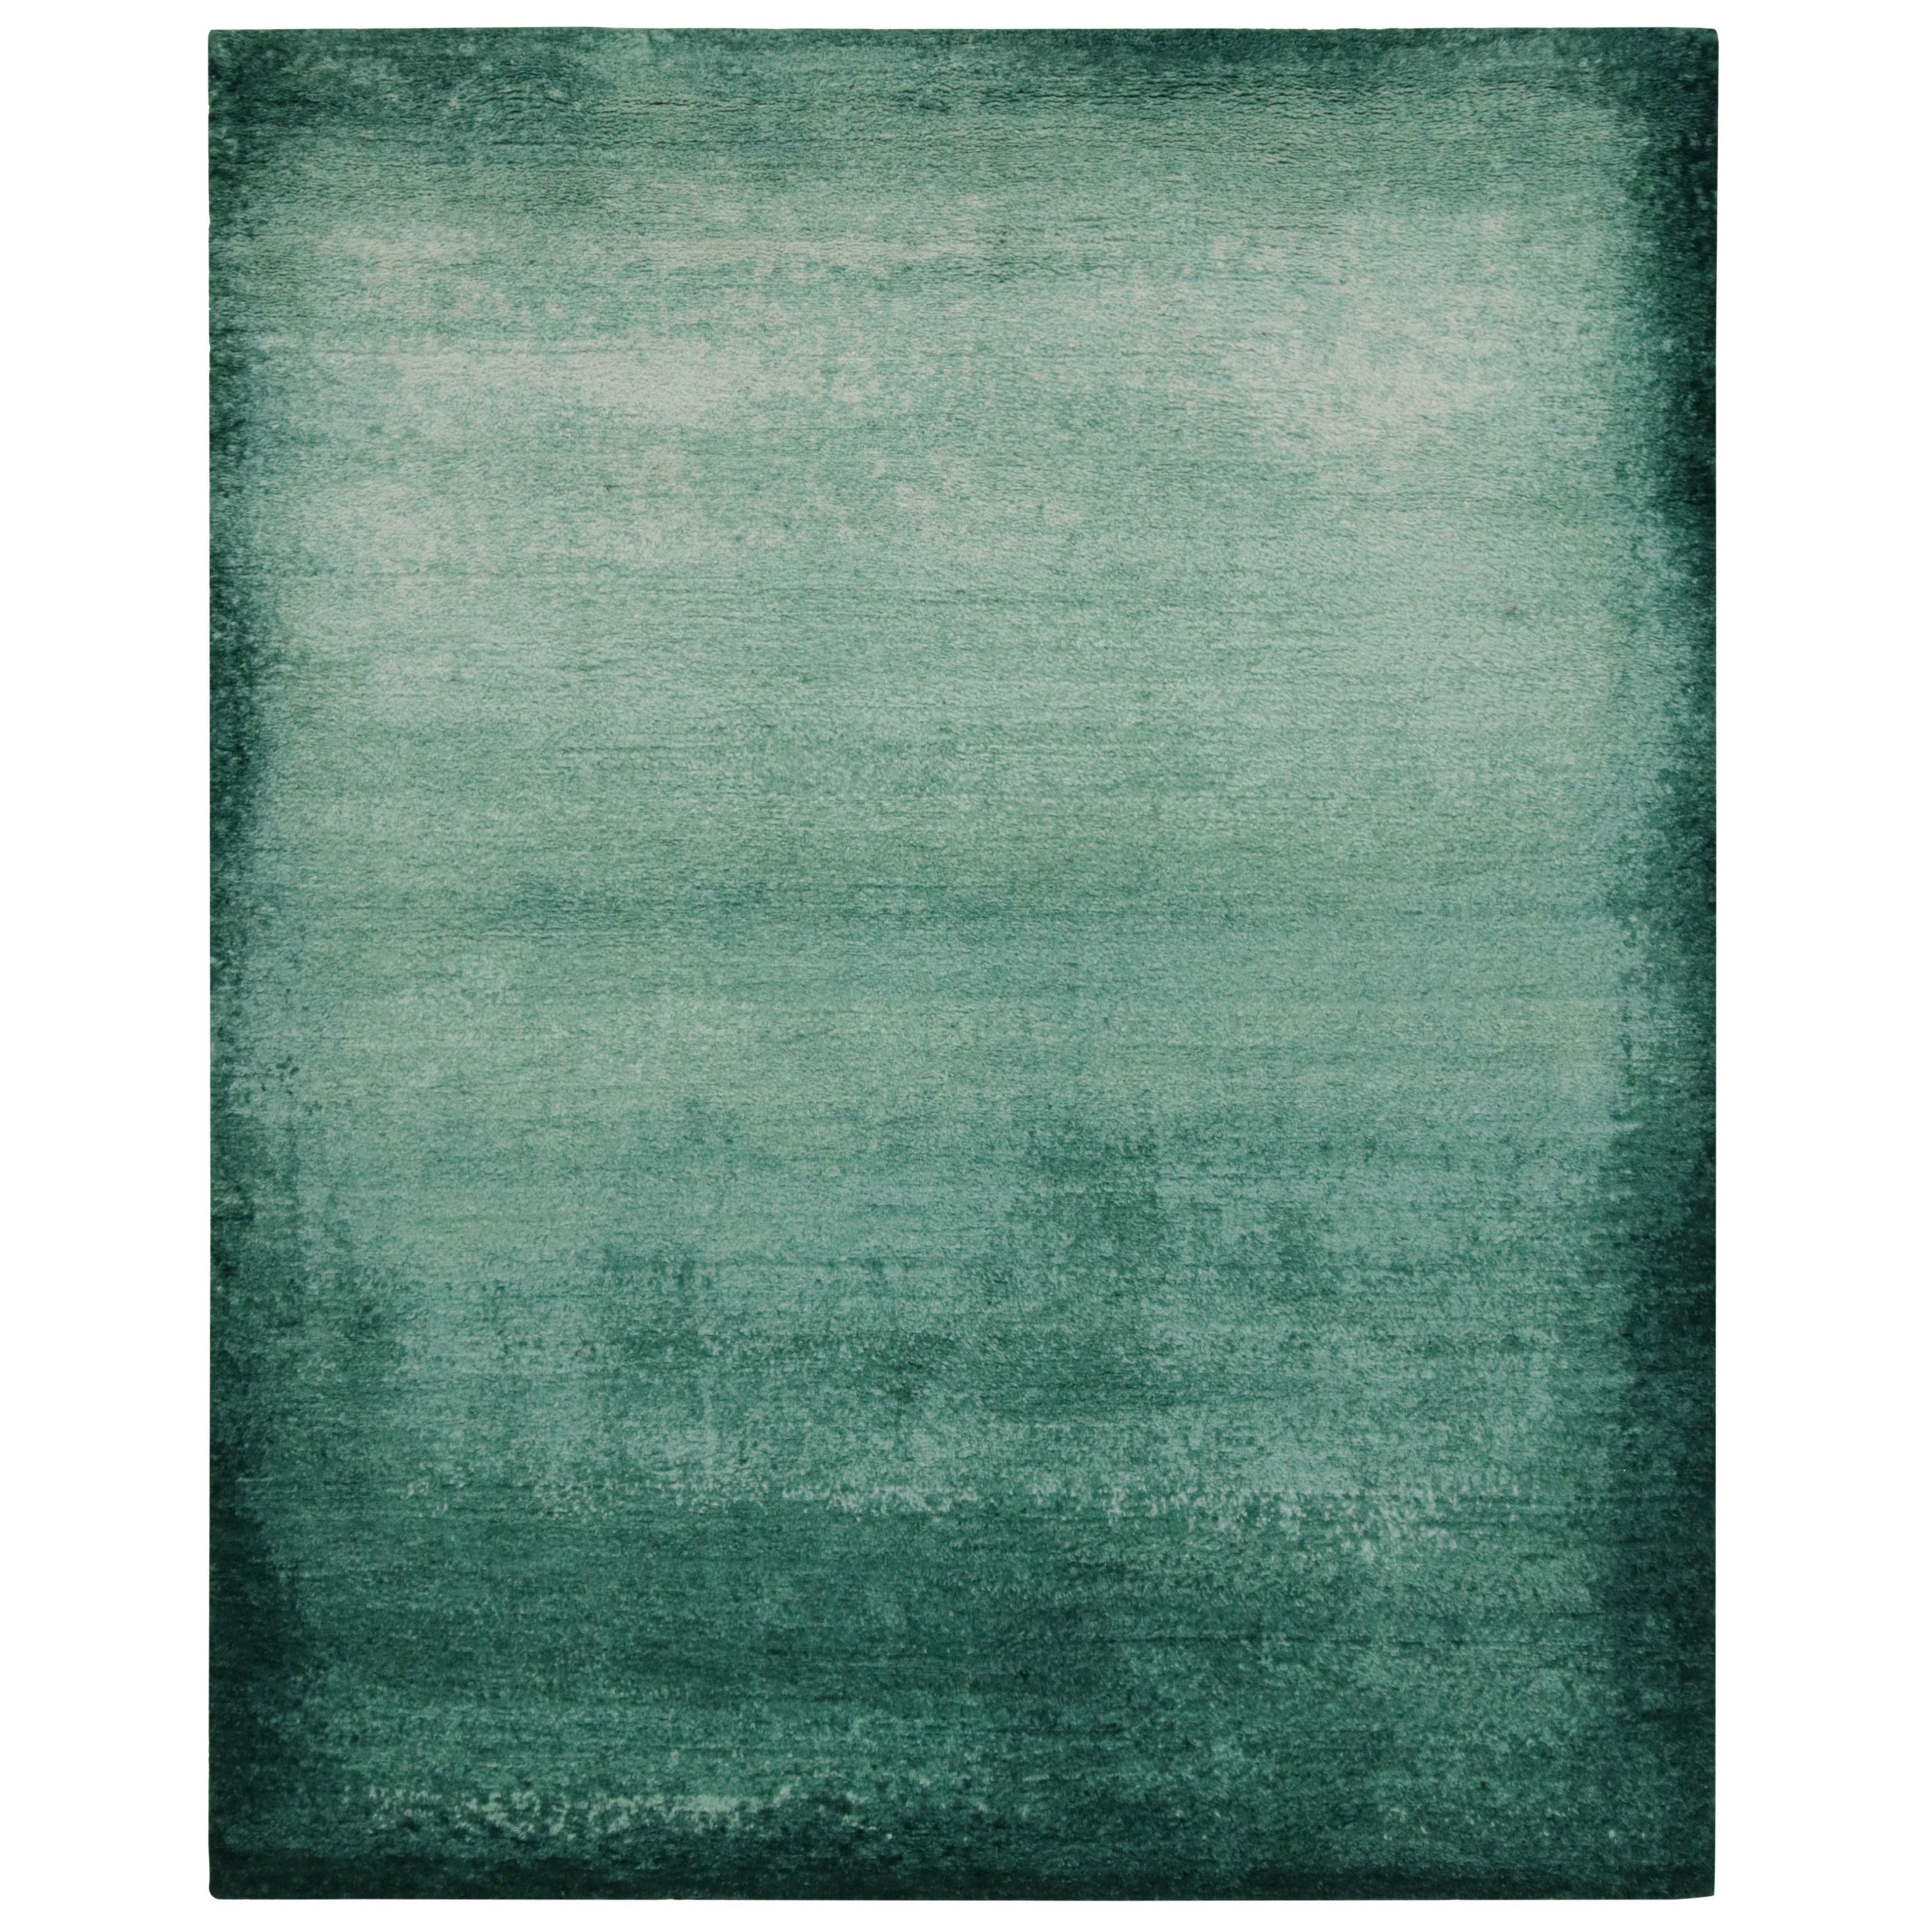 Rug & Kilim’s Contemporary Textural High Pile Rug in Teal Blue and Green